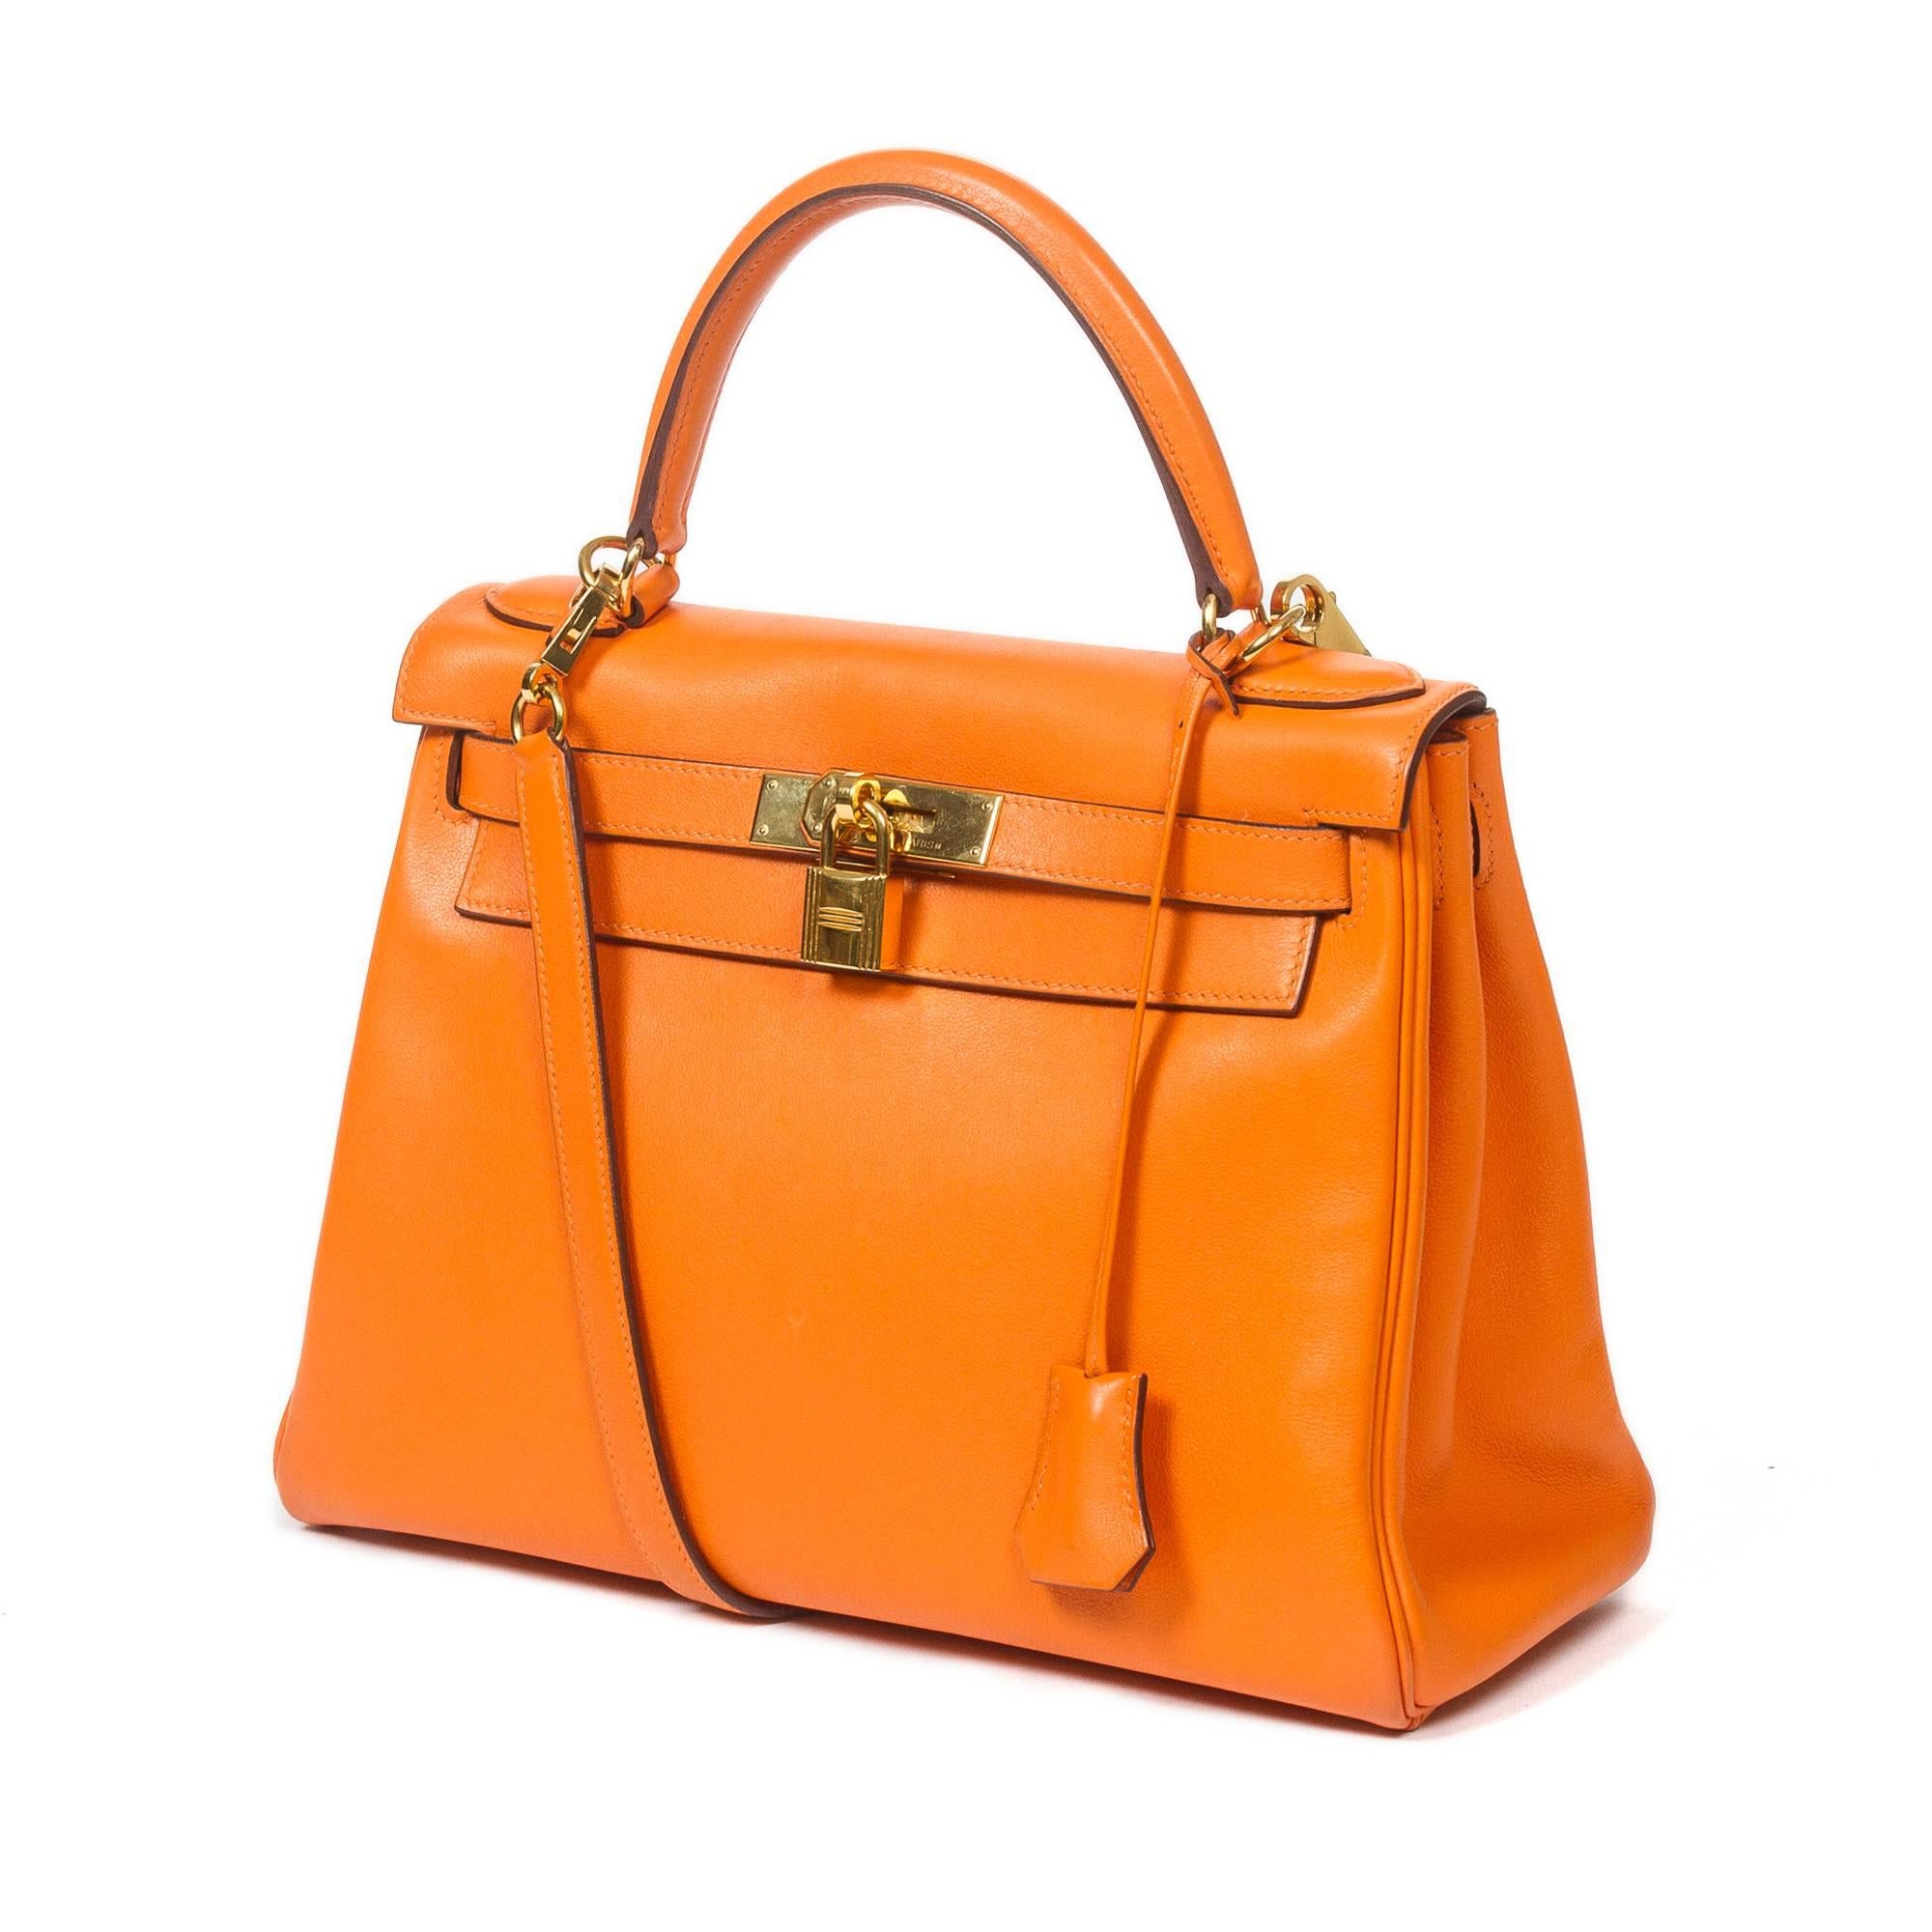 Kelly Retourné 28 in orange Swift leather with strap, cadenas and keys in clochette, gold tone hardware. Orange leather lined interior with 2 slip pockets and one zip pocket. Stamp K in square. Model from 2007. Dustbag included. Very slight scuffs